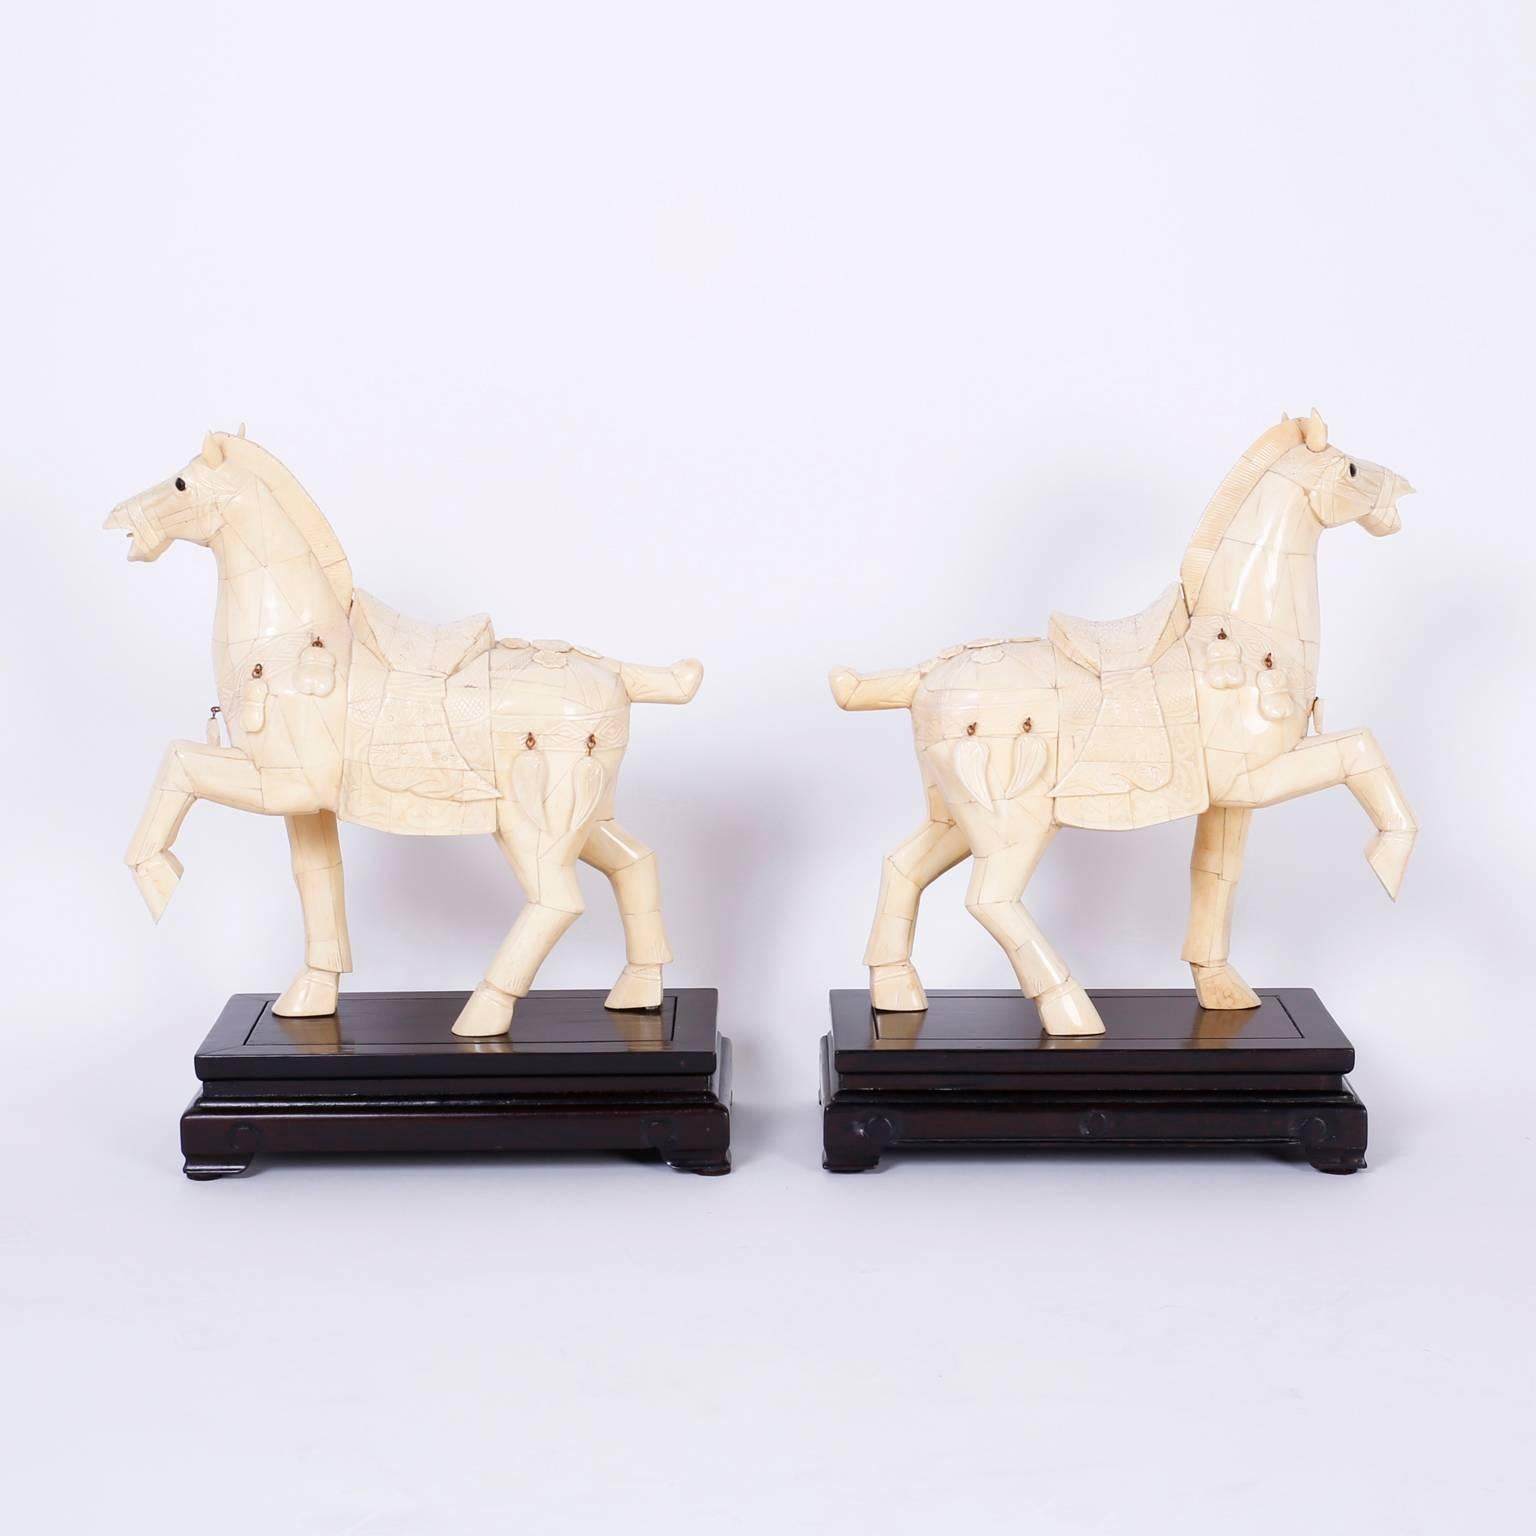 Impressive pair of Chinese carved bone horses with classic Tang dynasty form presented on carved wood ebonized stands.
   